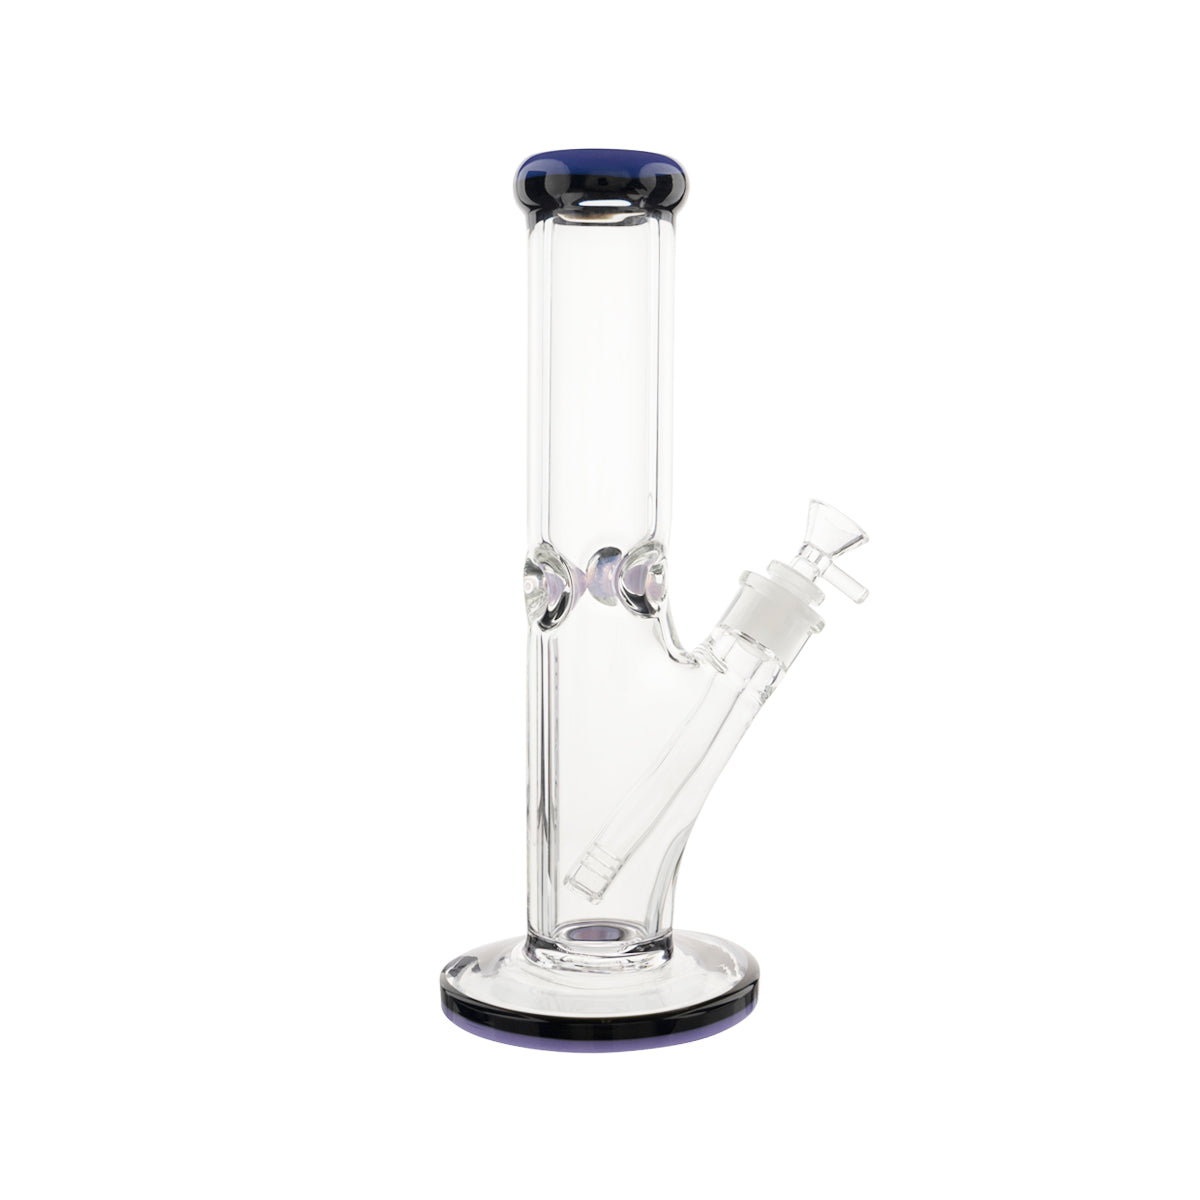 This 12 inche retro straight water pipe is perfect for a smoking sesh with friends.